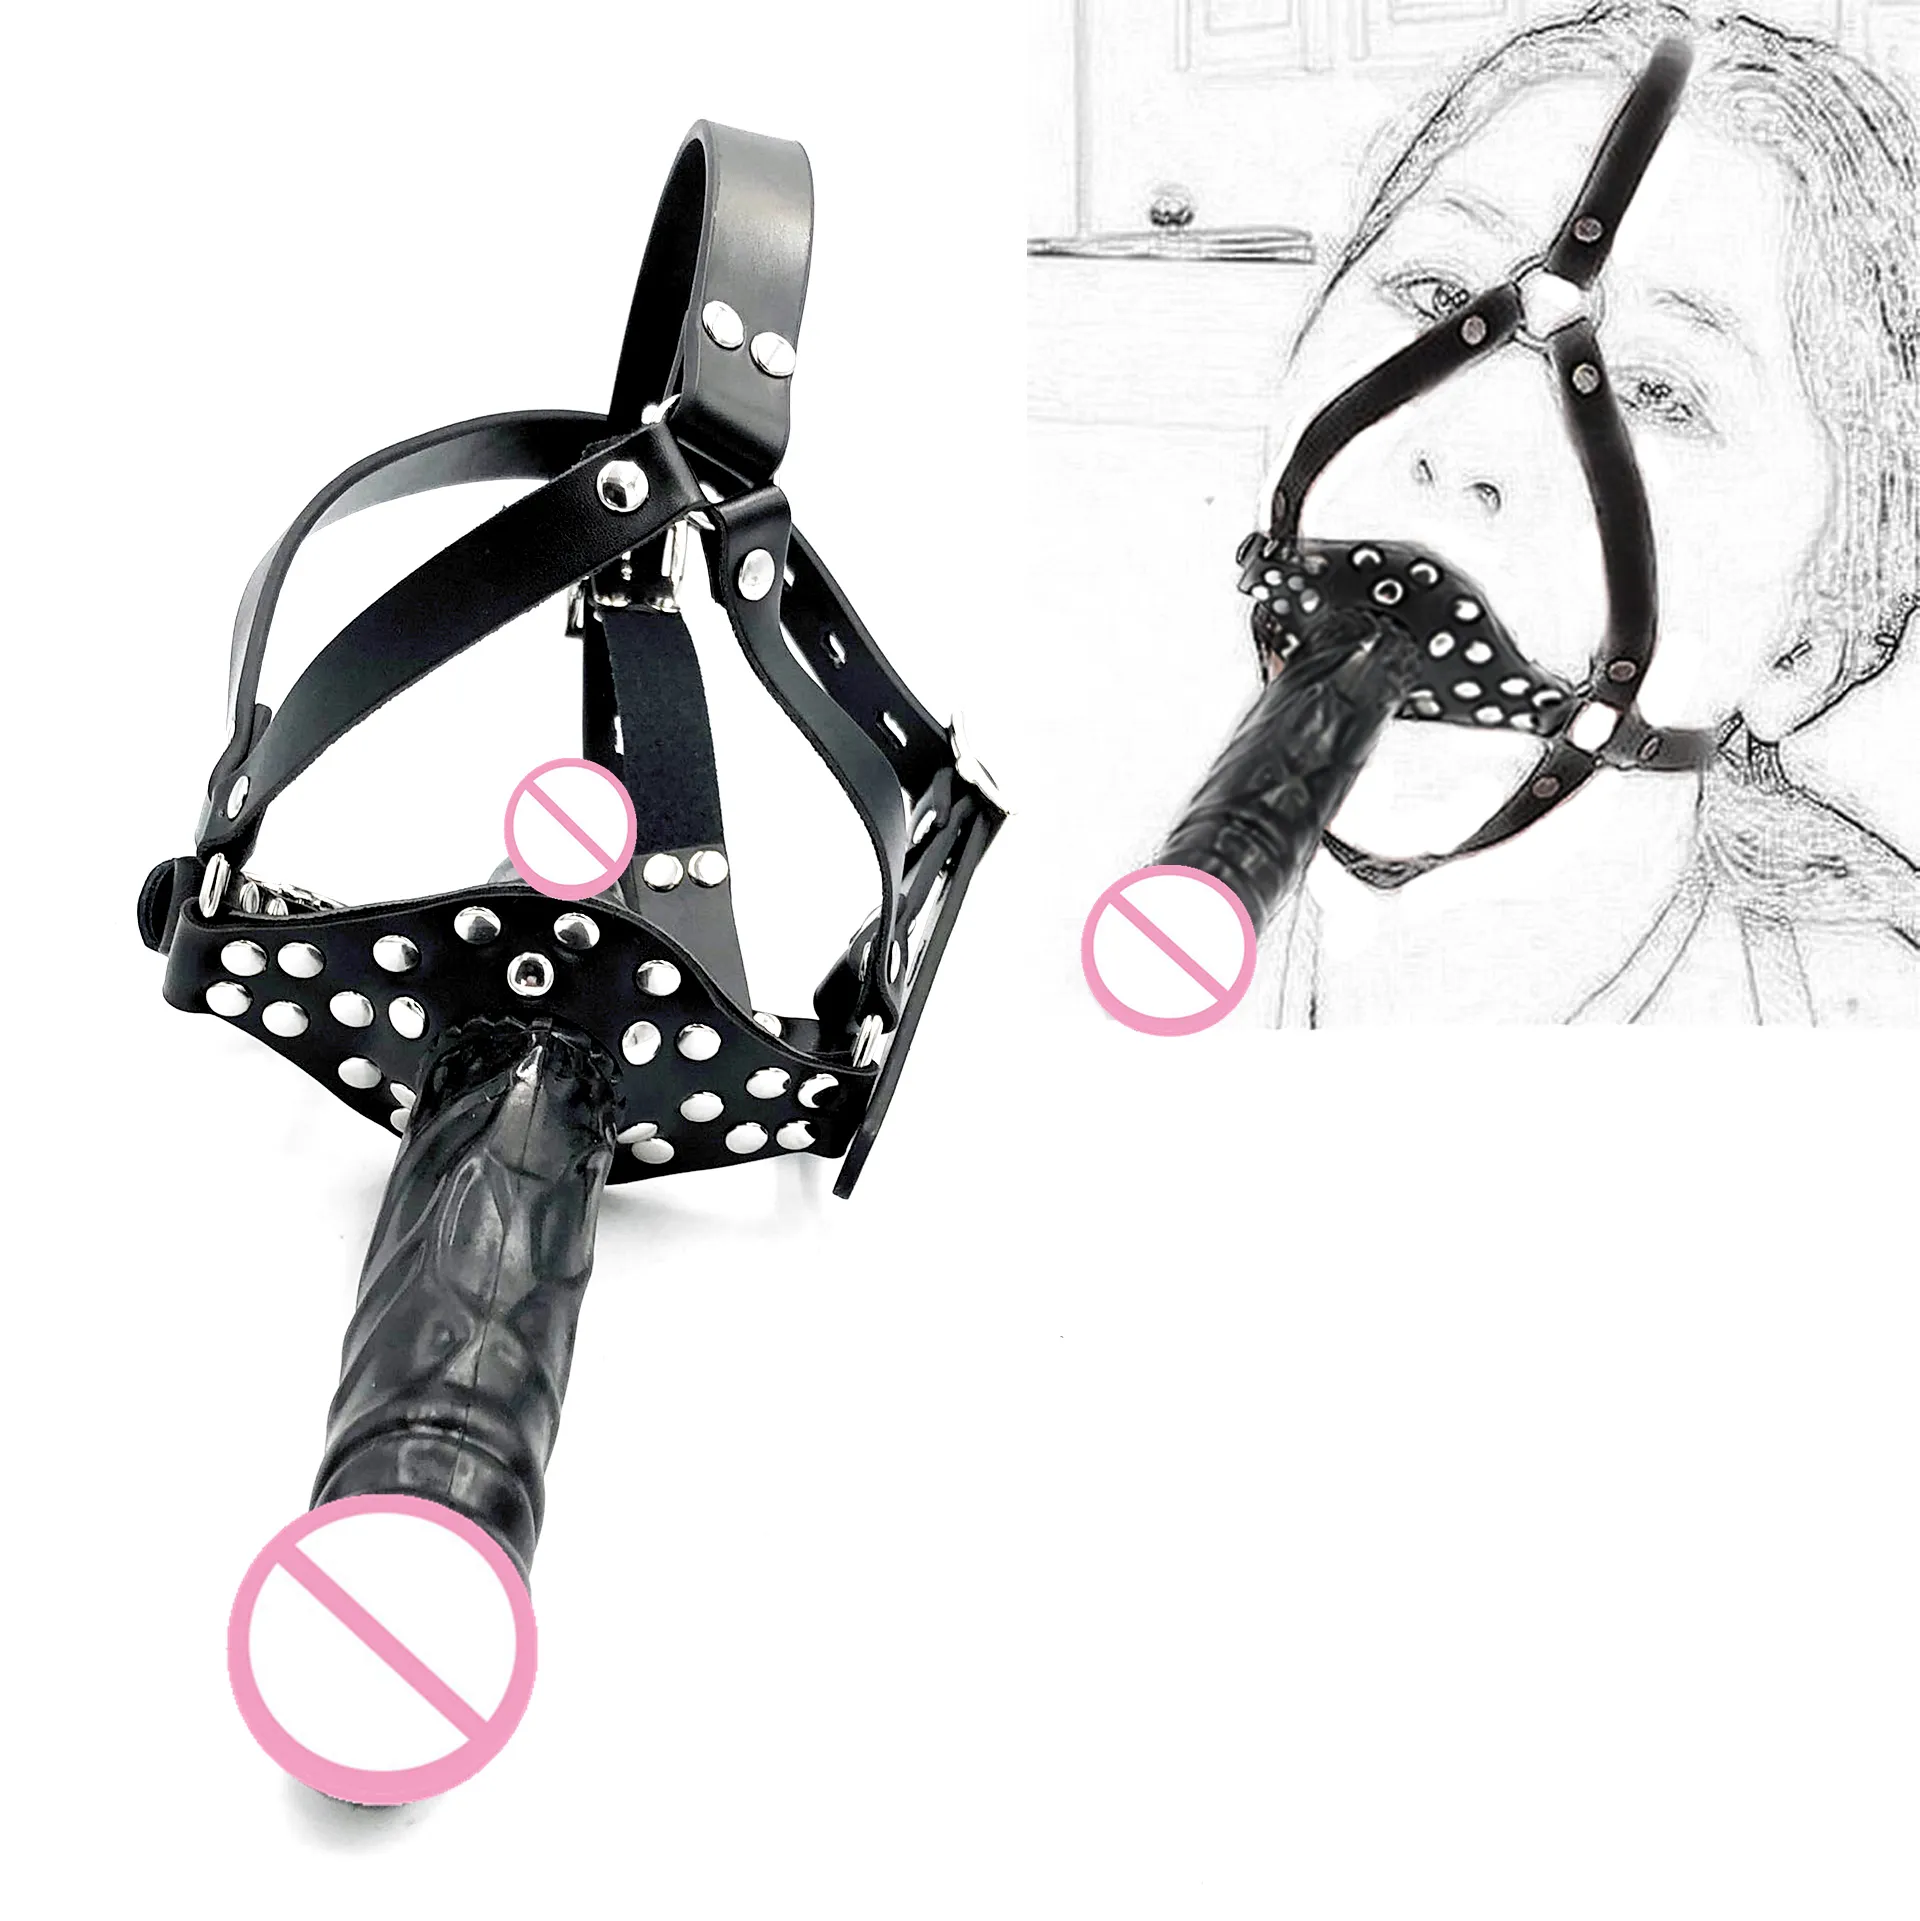 sexy Shop Double-Ended Dildo Gag Strapon Head Harness Mouth Plug Penis Realistic Cock Dick BDSM Erotic toy For Lesbian Women